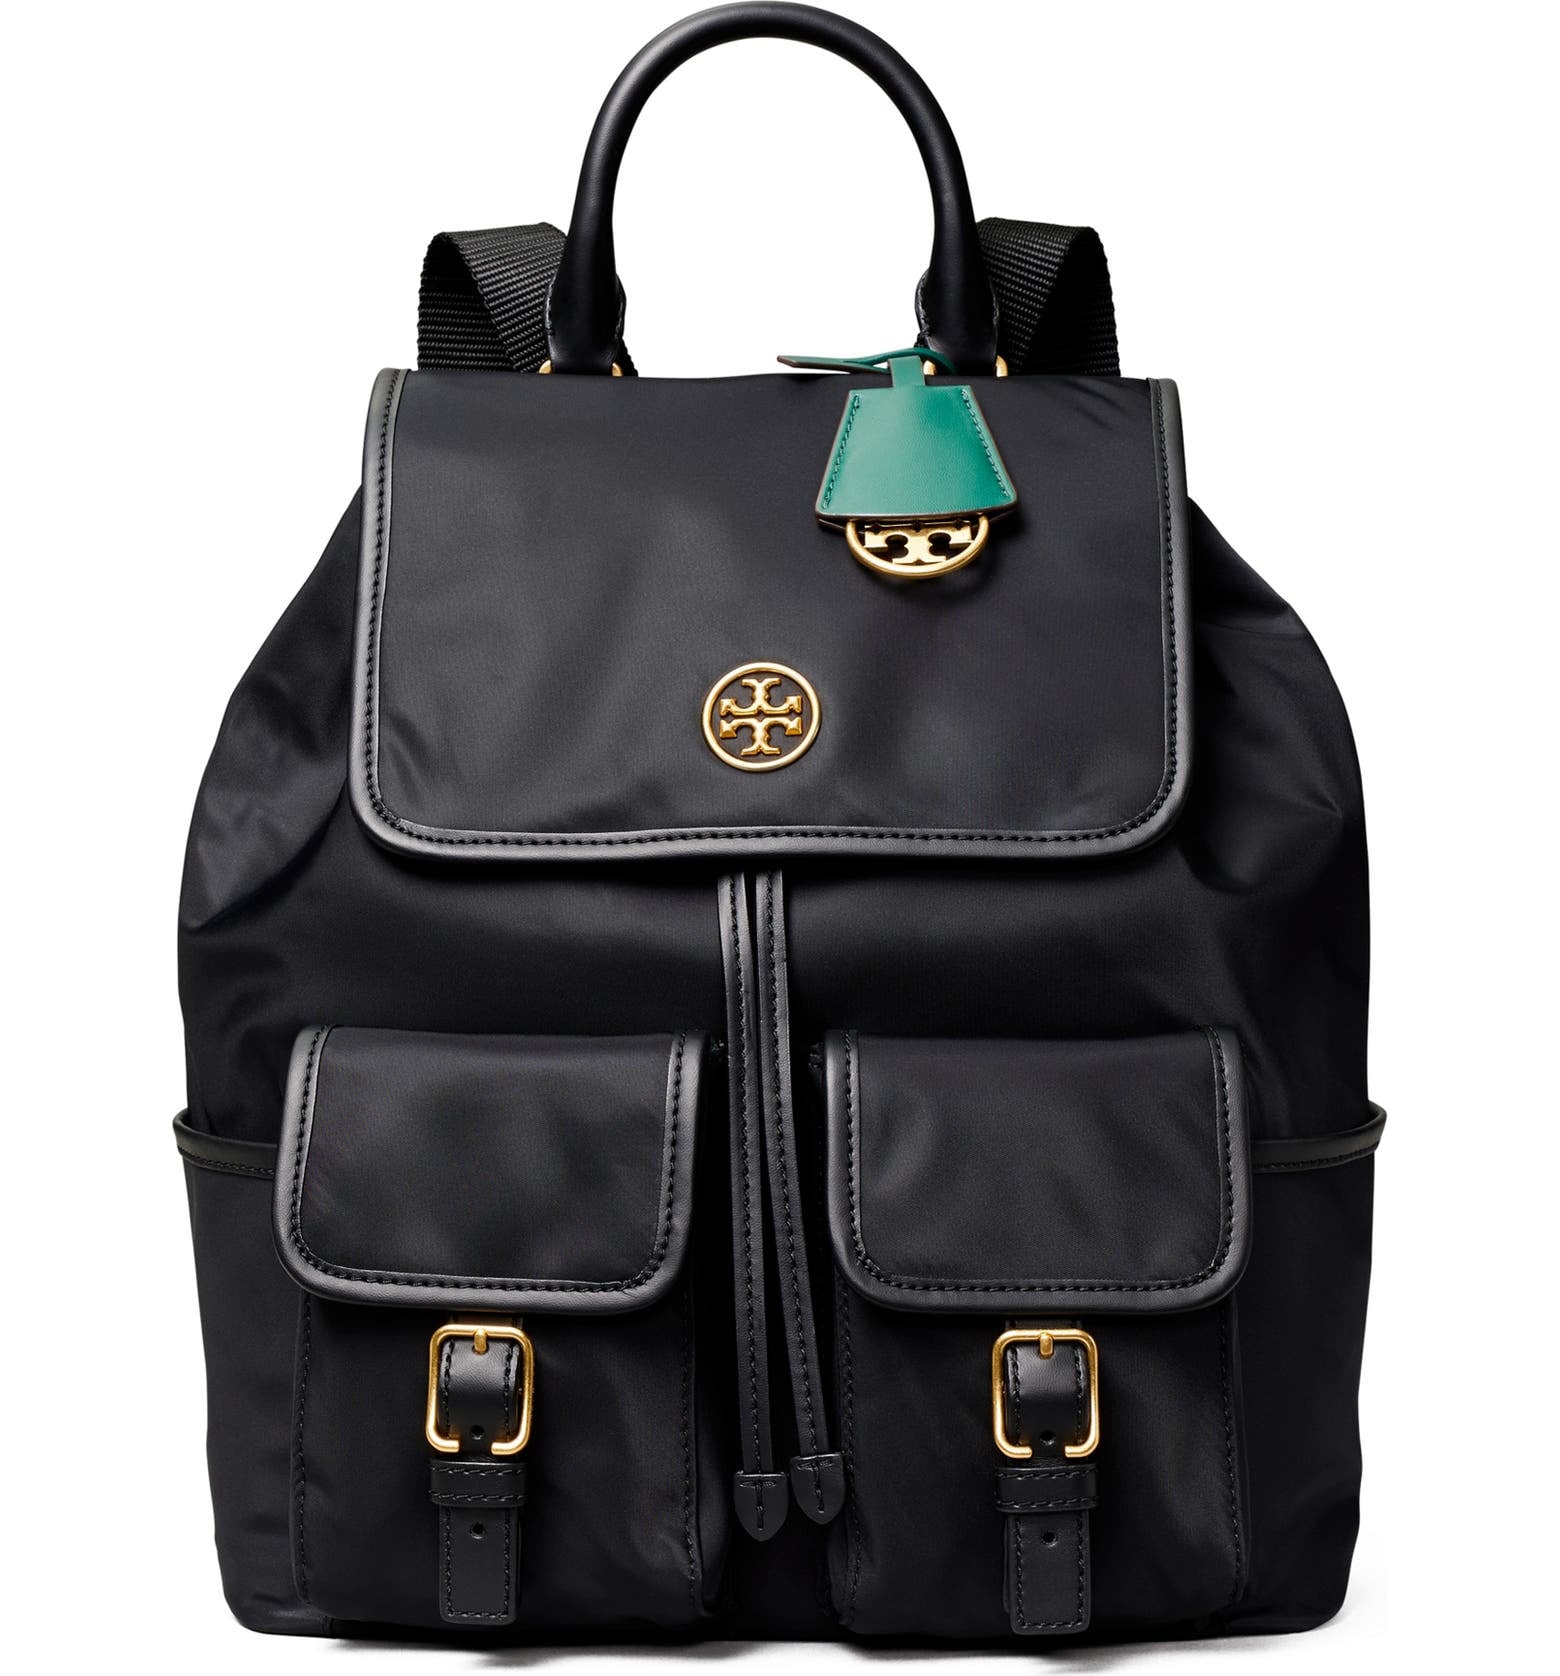 Tory Burch Piper Flap Nylon Backpack | 16 Stylish Backpacks If You Like to  Be Hands-Free at All Times | POPSUGAR Travel Photo 15